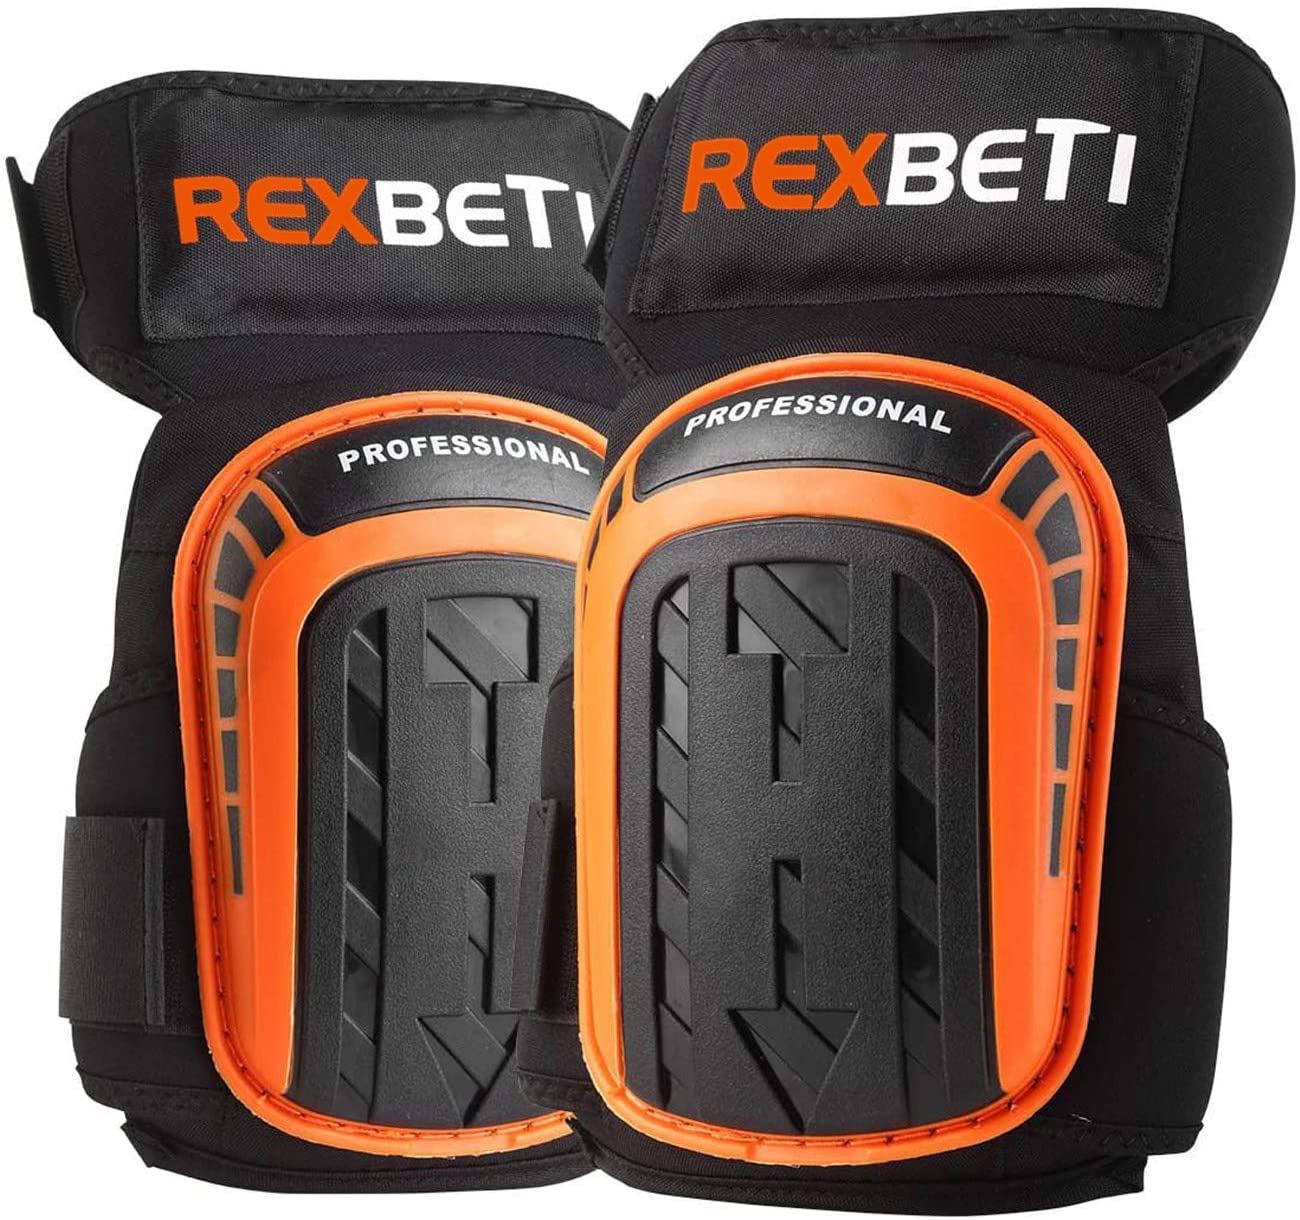 Knee Pads for Work, Construction Gel Knee Pads Tools by REXBETI, Heavy Duty Comfortable Anti-slip Foam Knee Pads for Cleaning Flooring and Garden, Strong Stretchable Straps, 1 Pair